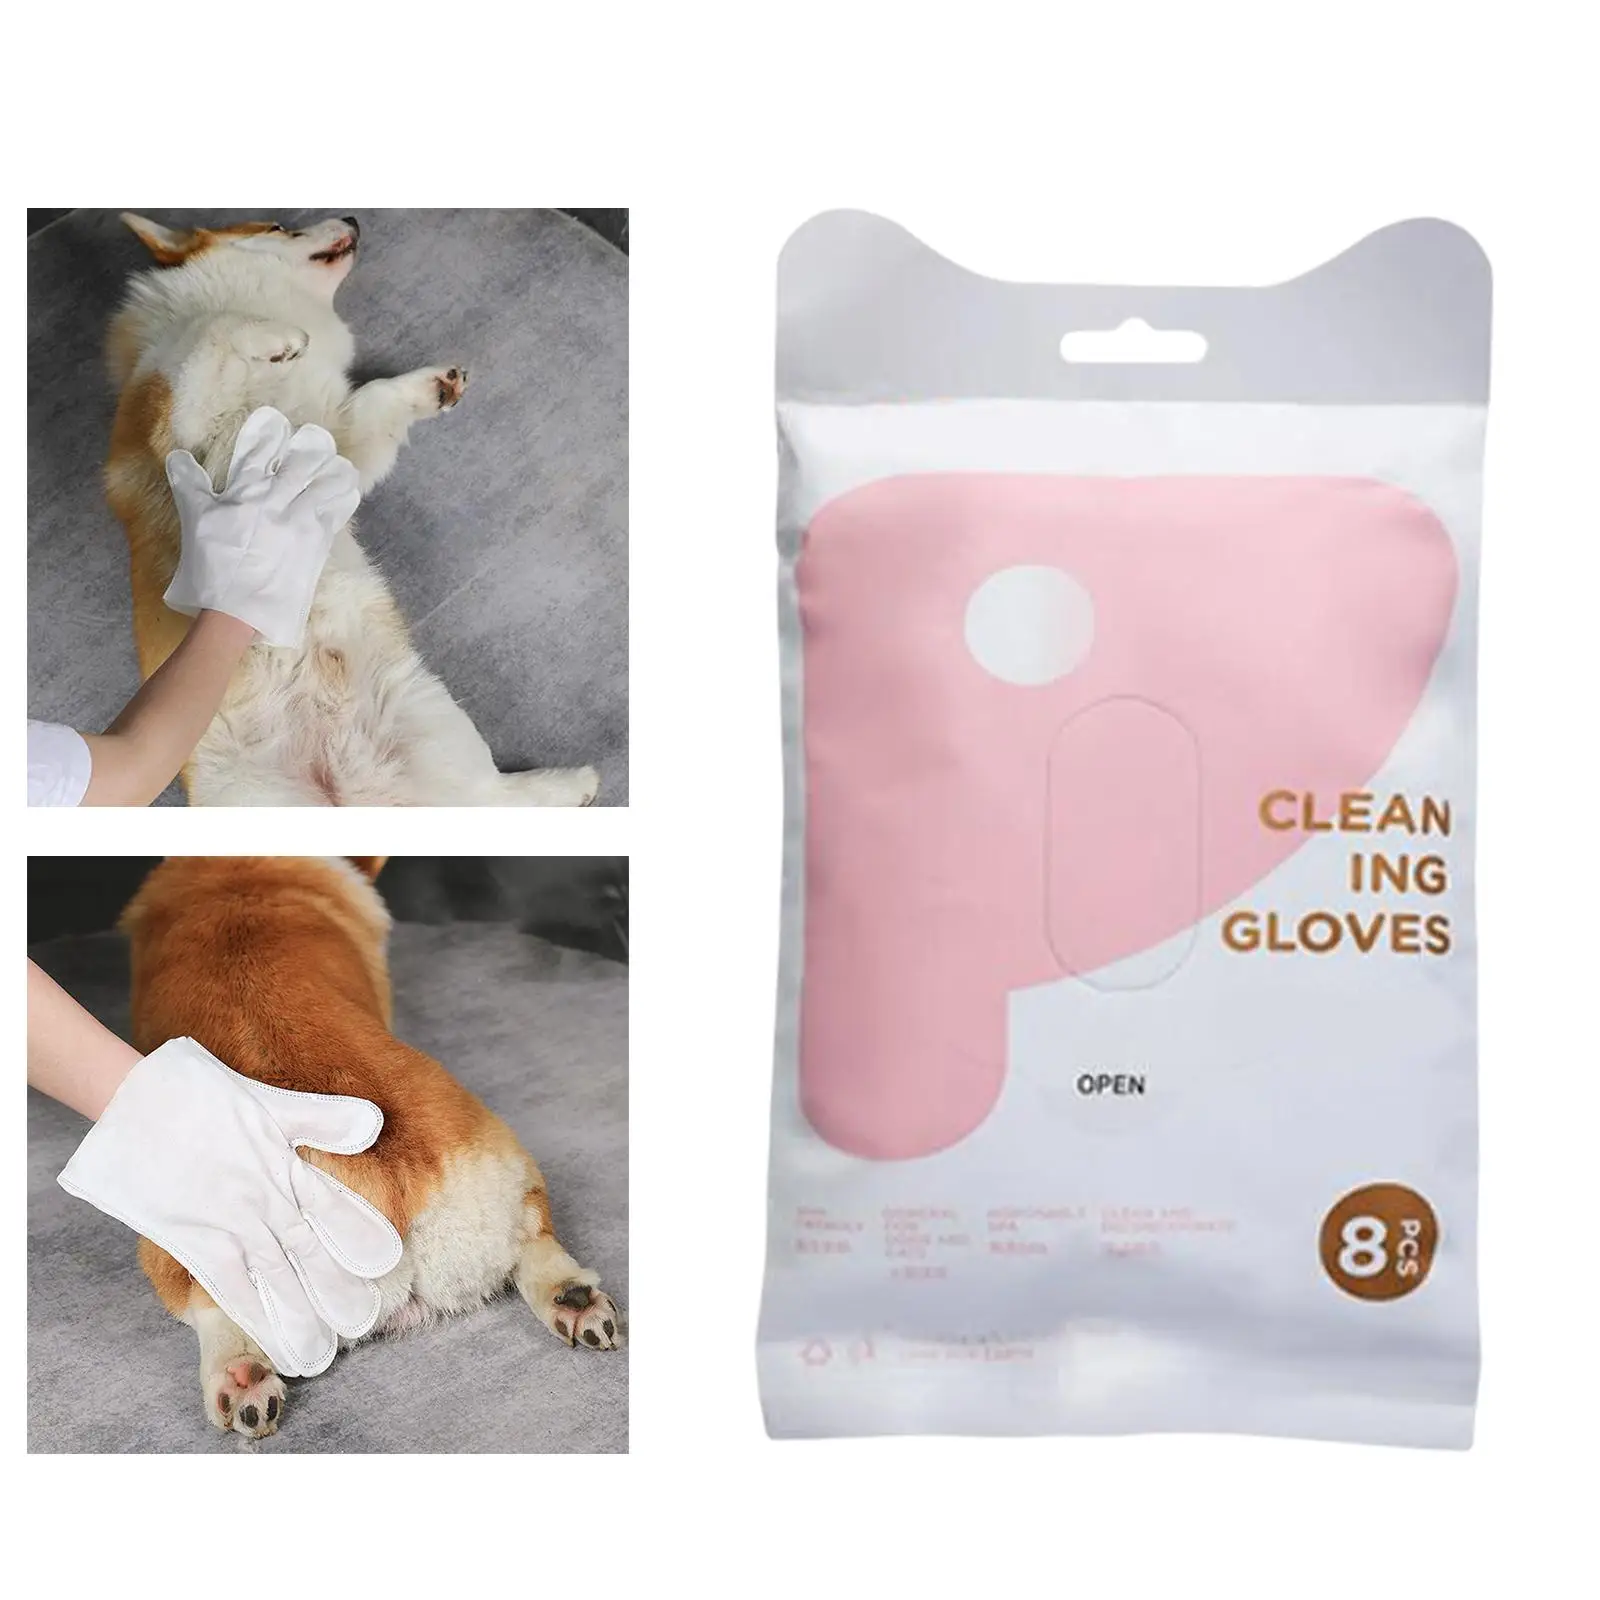 8Pcs/Pack Pet Grooming Gloves Large Towels wipe Puppy wipe Dust wipe Massage 5 Fingers Glove